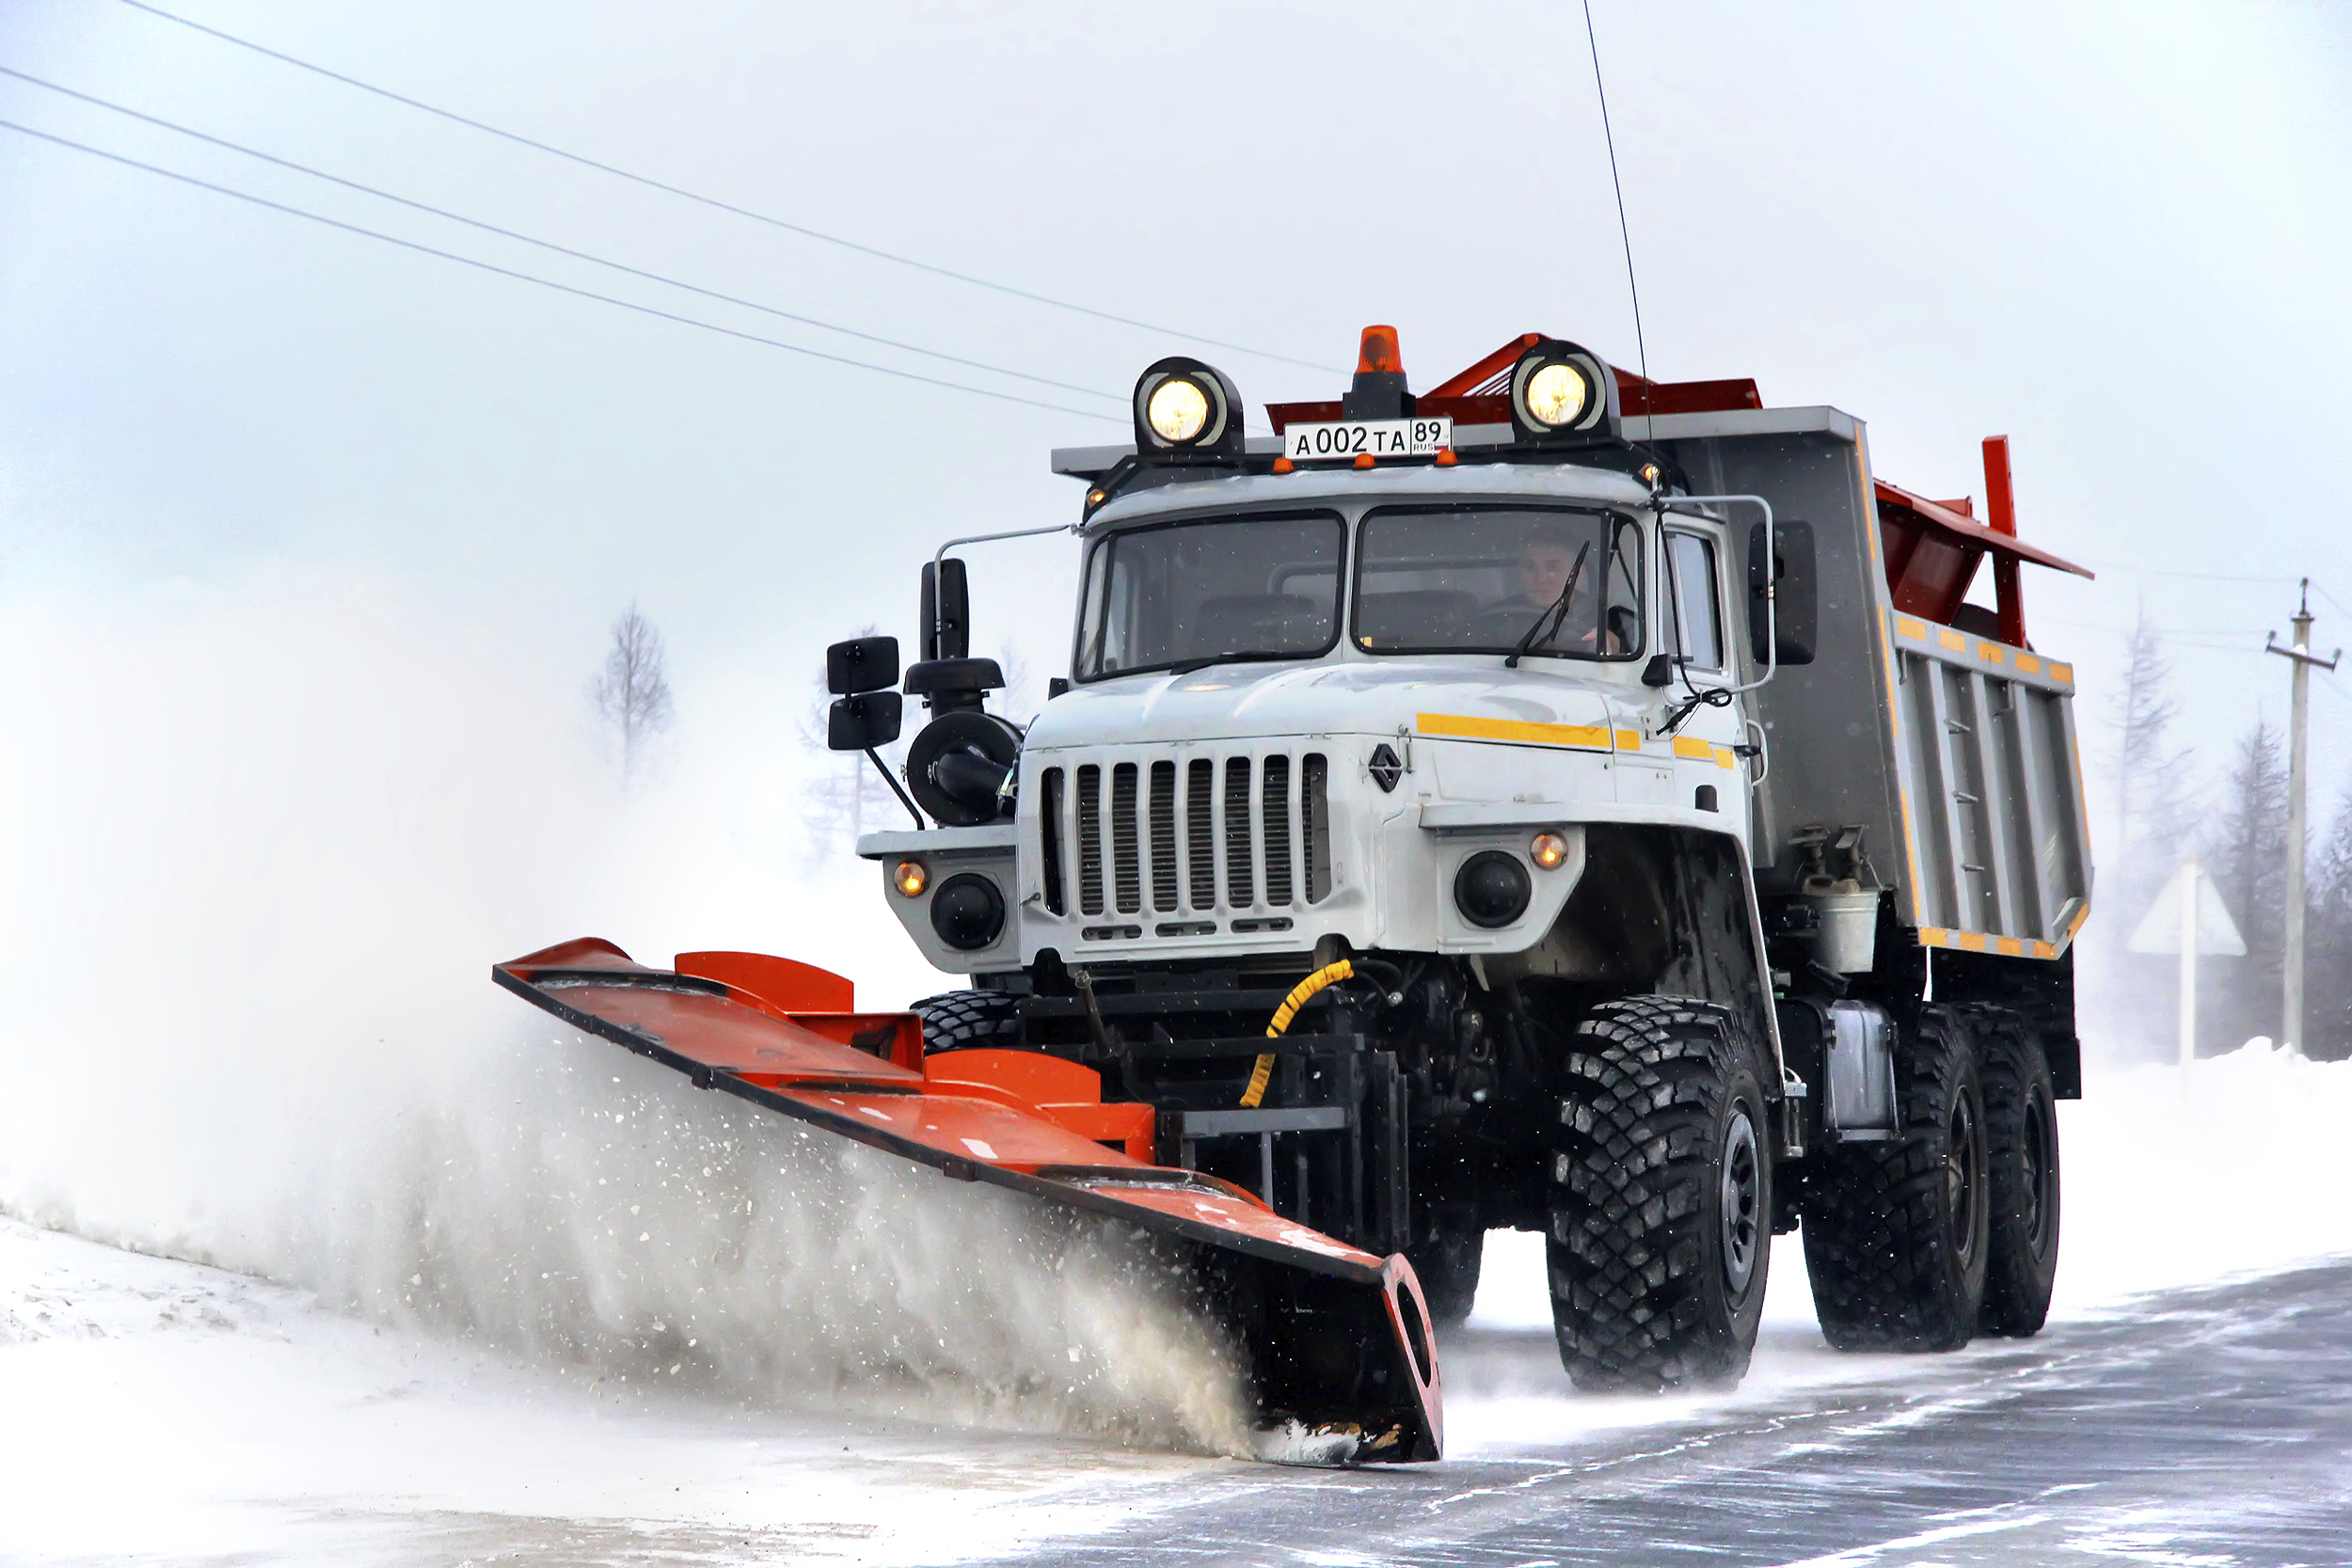 Find the commercial snow removal to avoid liability